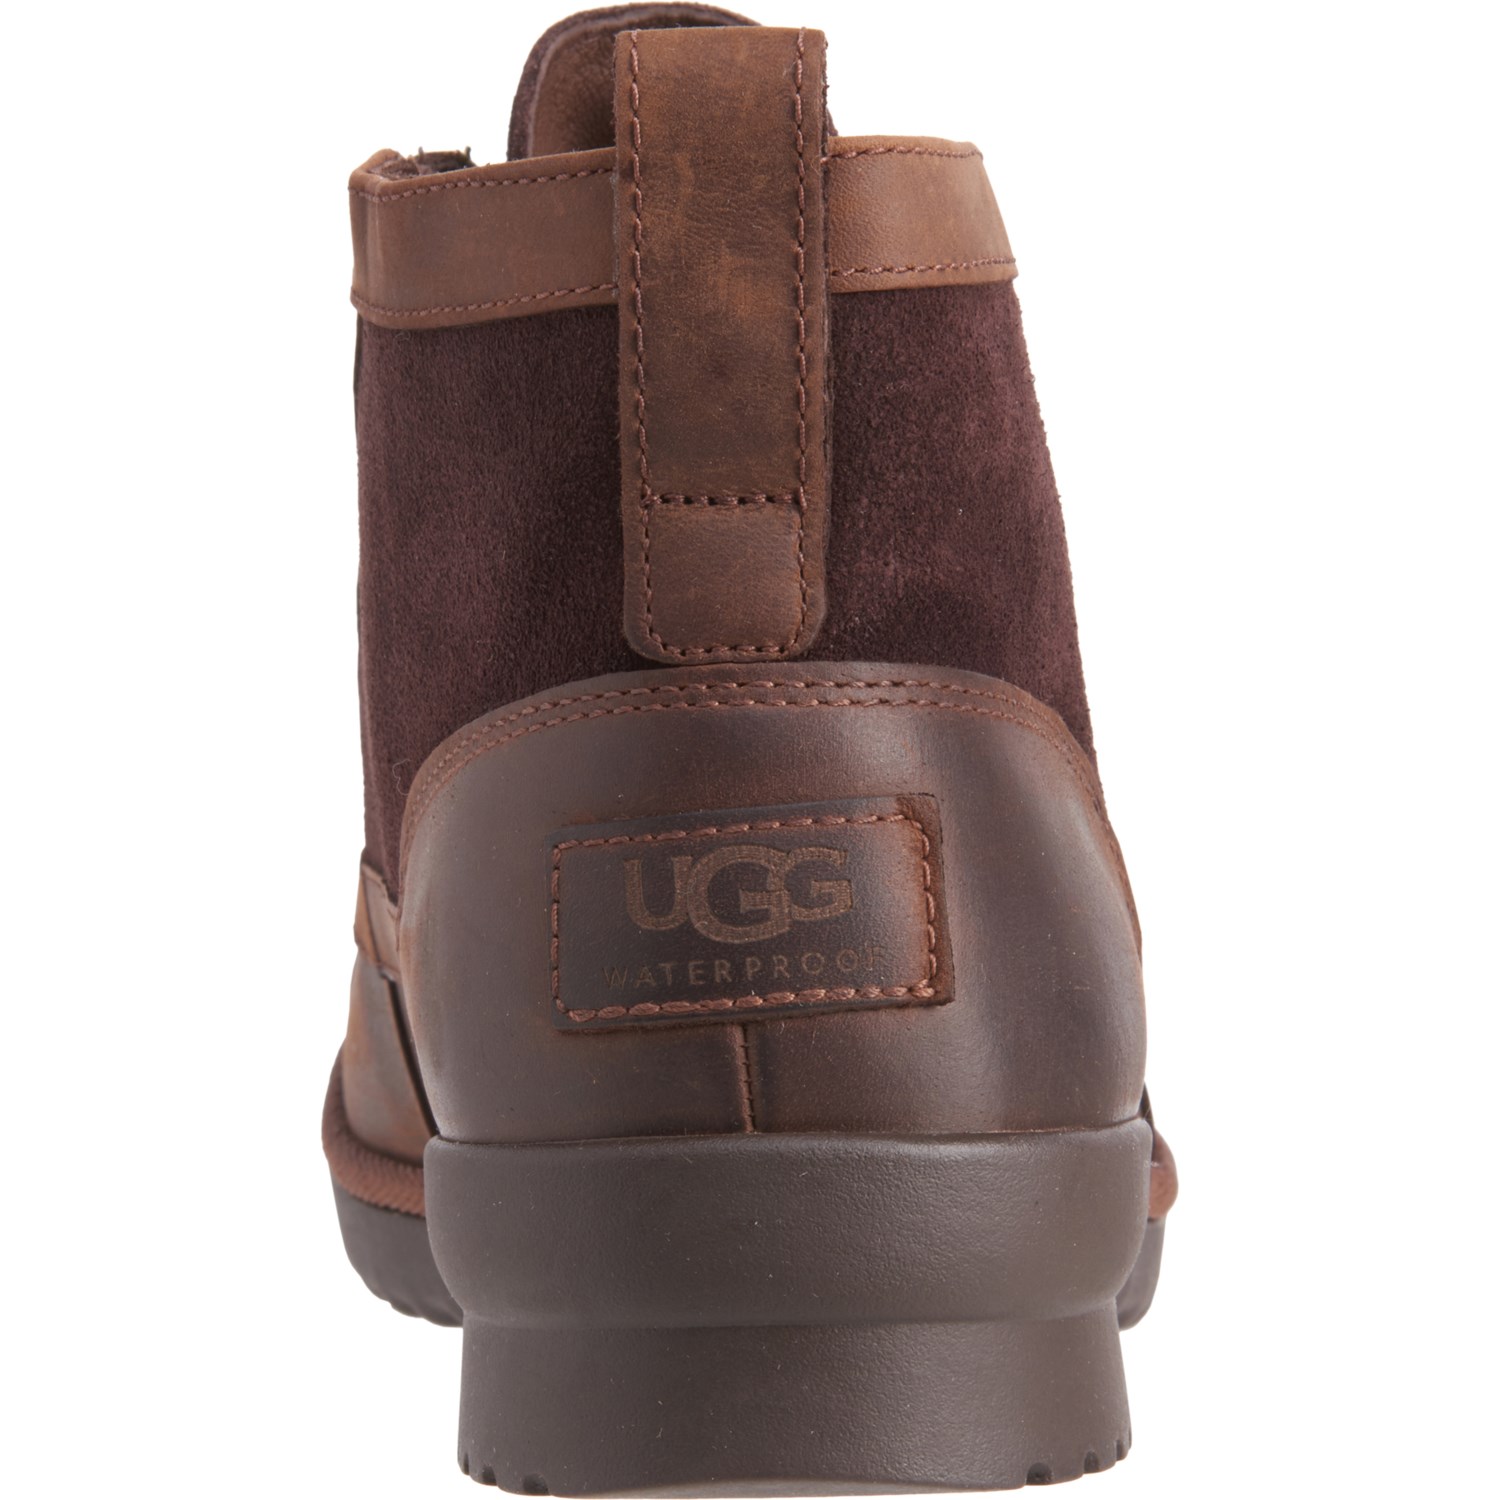 ugg heather duck boots